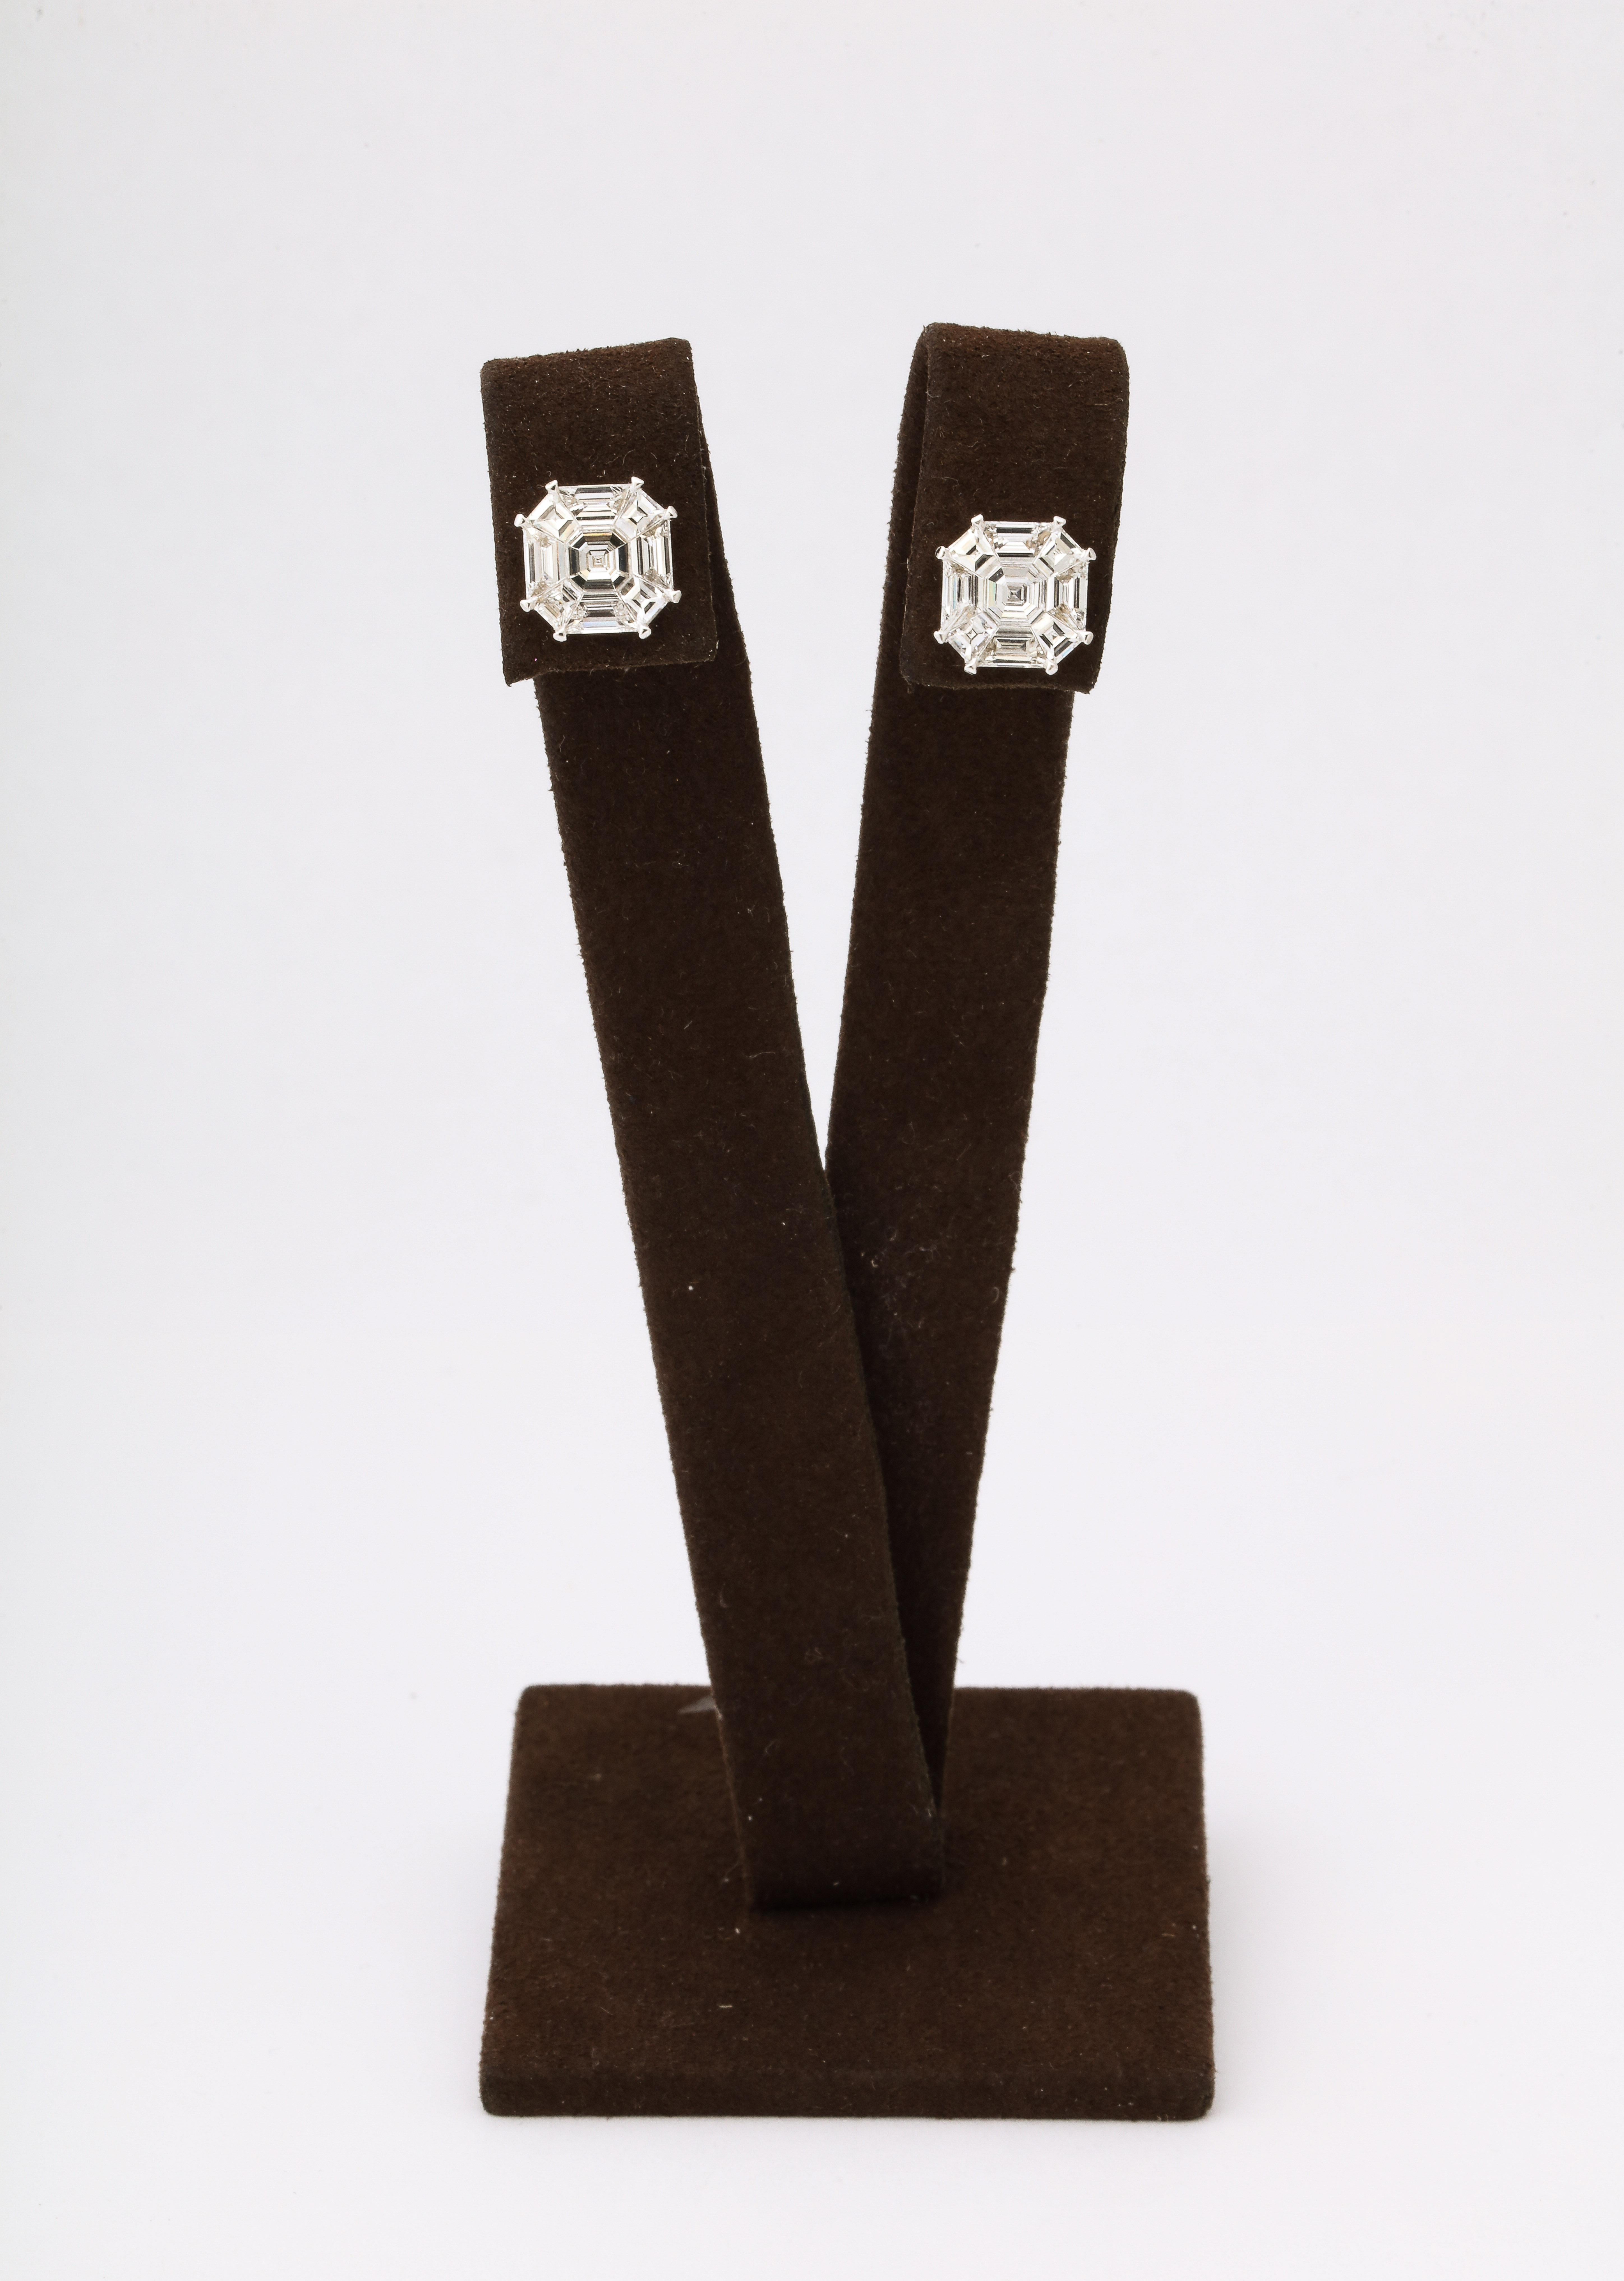 
A FABULOUS pair of stud earrings! 

Each stud has the measurements of an over 5 carat Asscher cut diamond! 

3.16 carats of F color VS special cut diamonds illusion set in 18k white gold. 

Approximately 10.08 mm x 10.08 mm. 